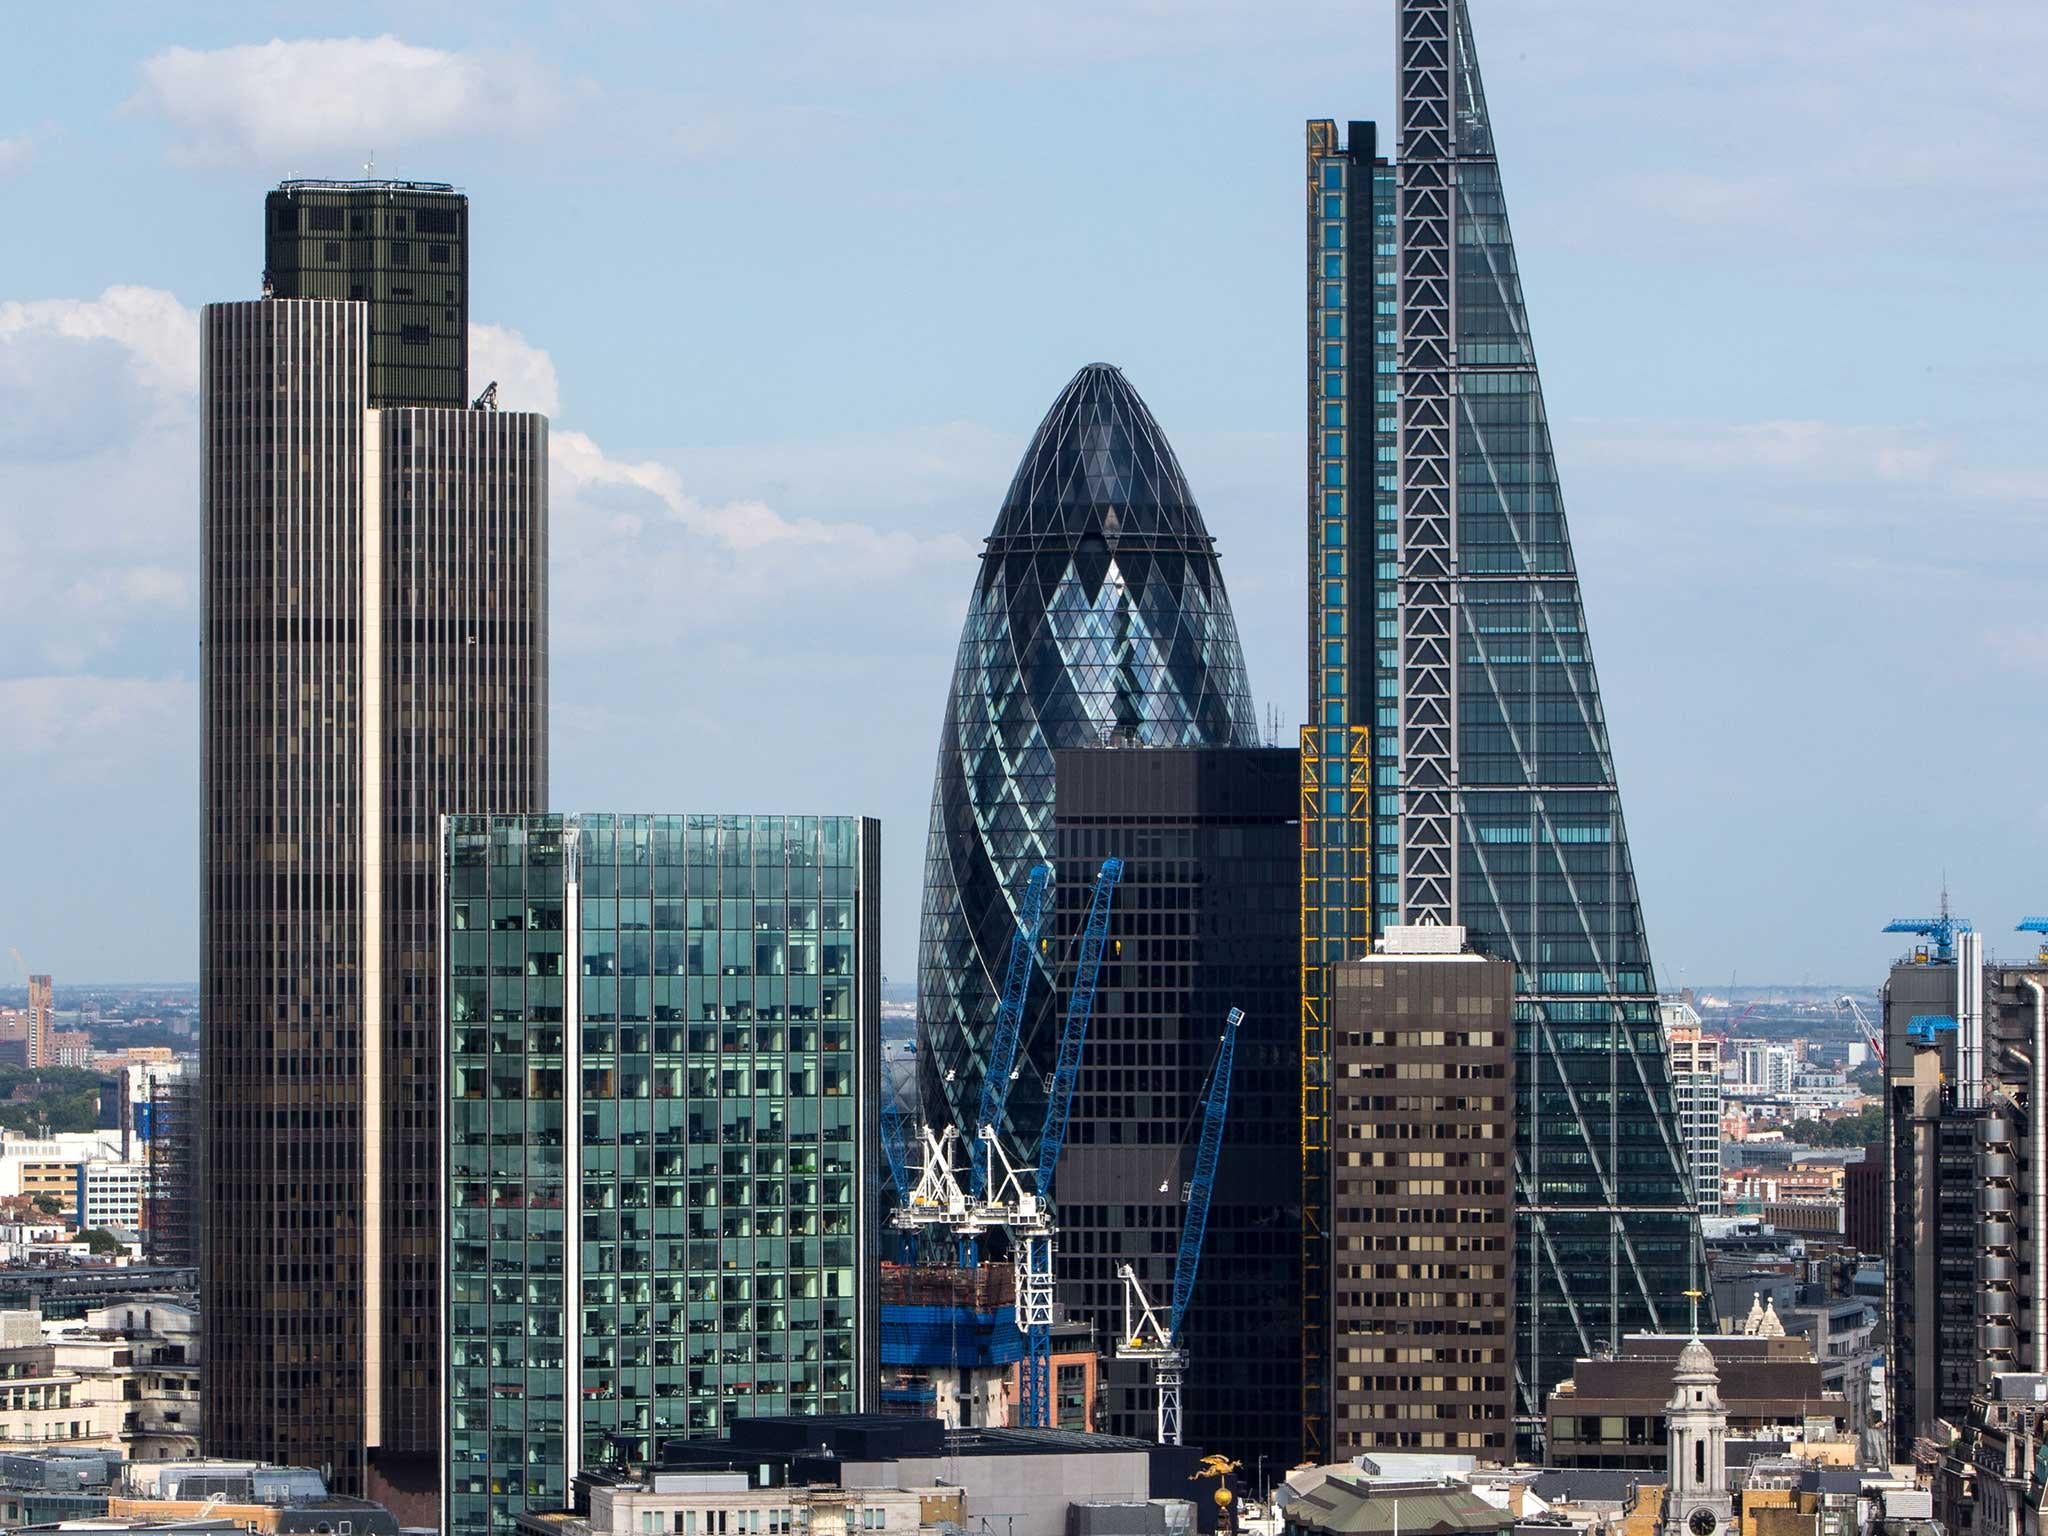 Banks are expected to leave London if crucial ‘passporting’ rights are lost after Brexit